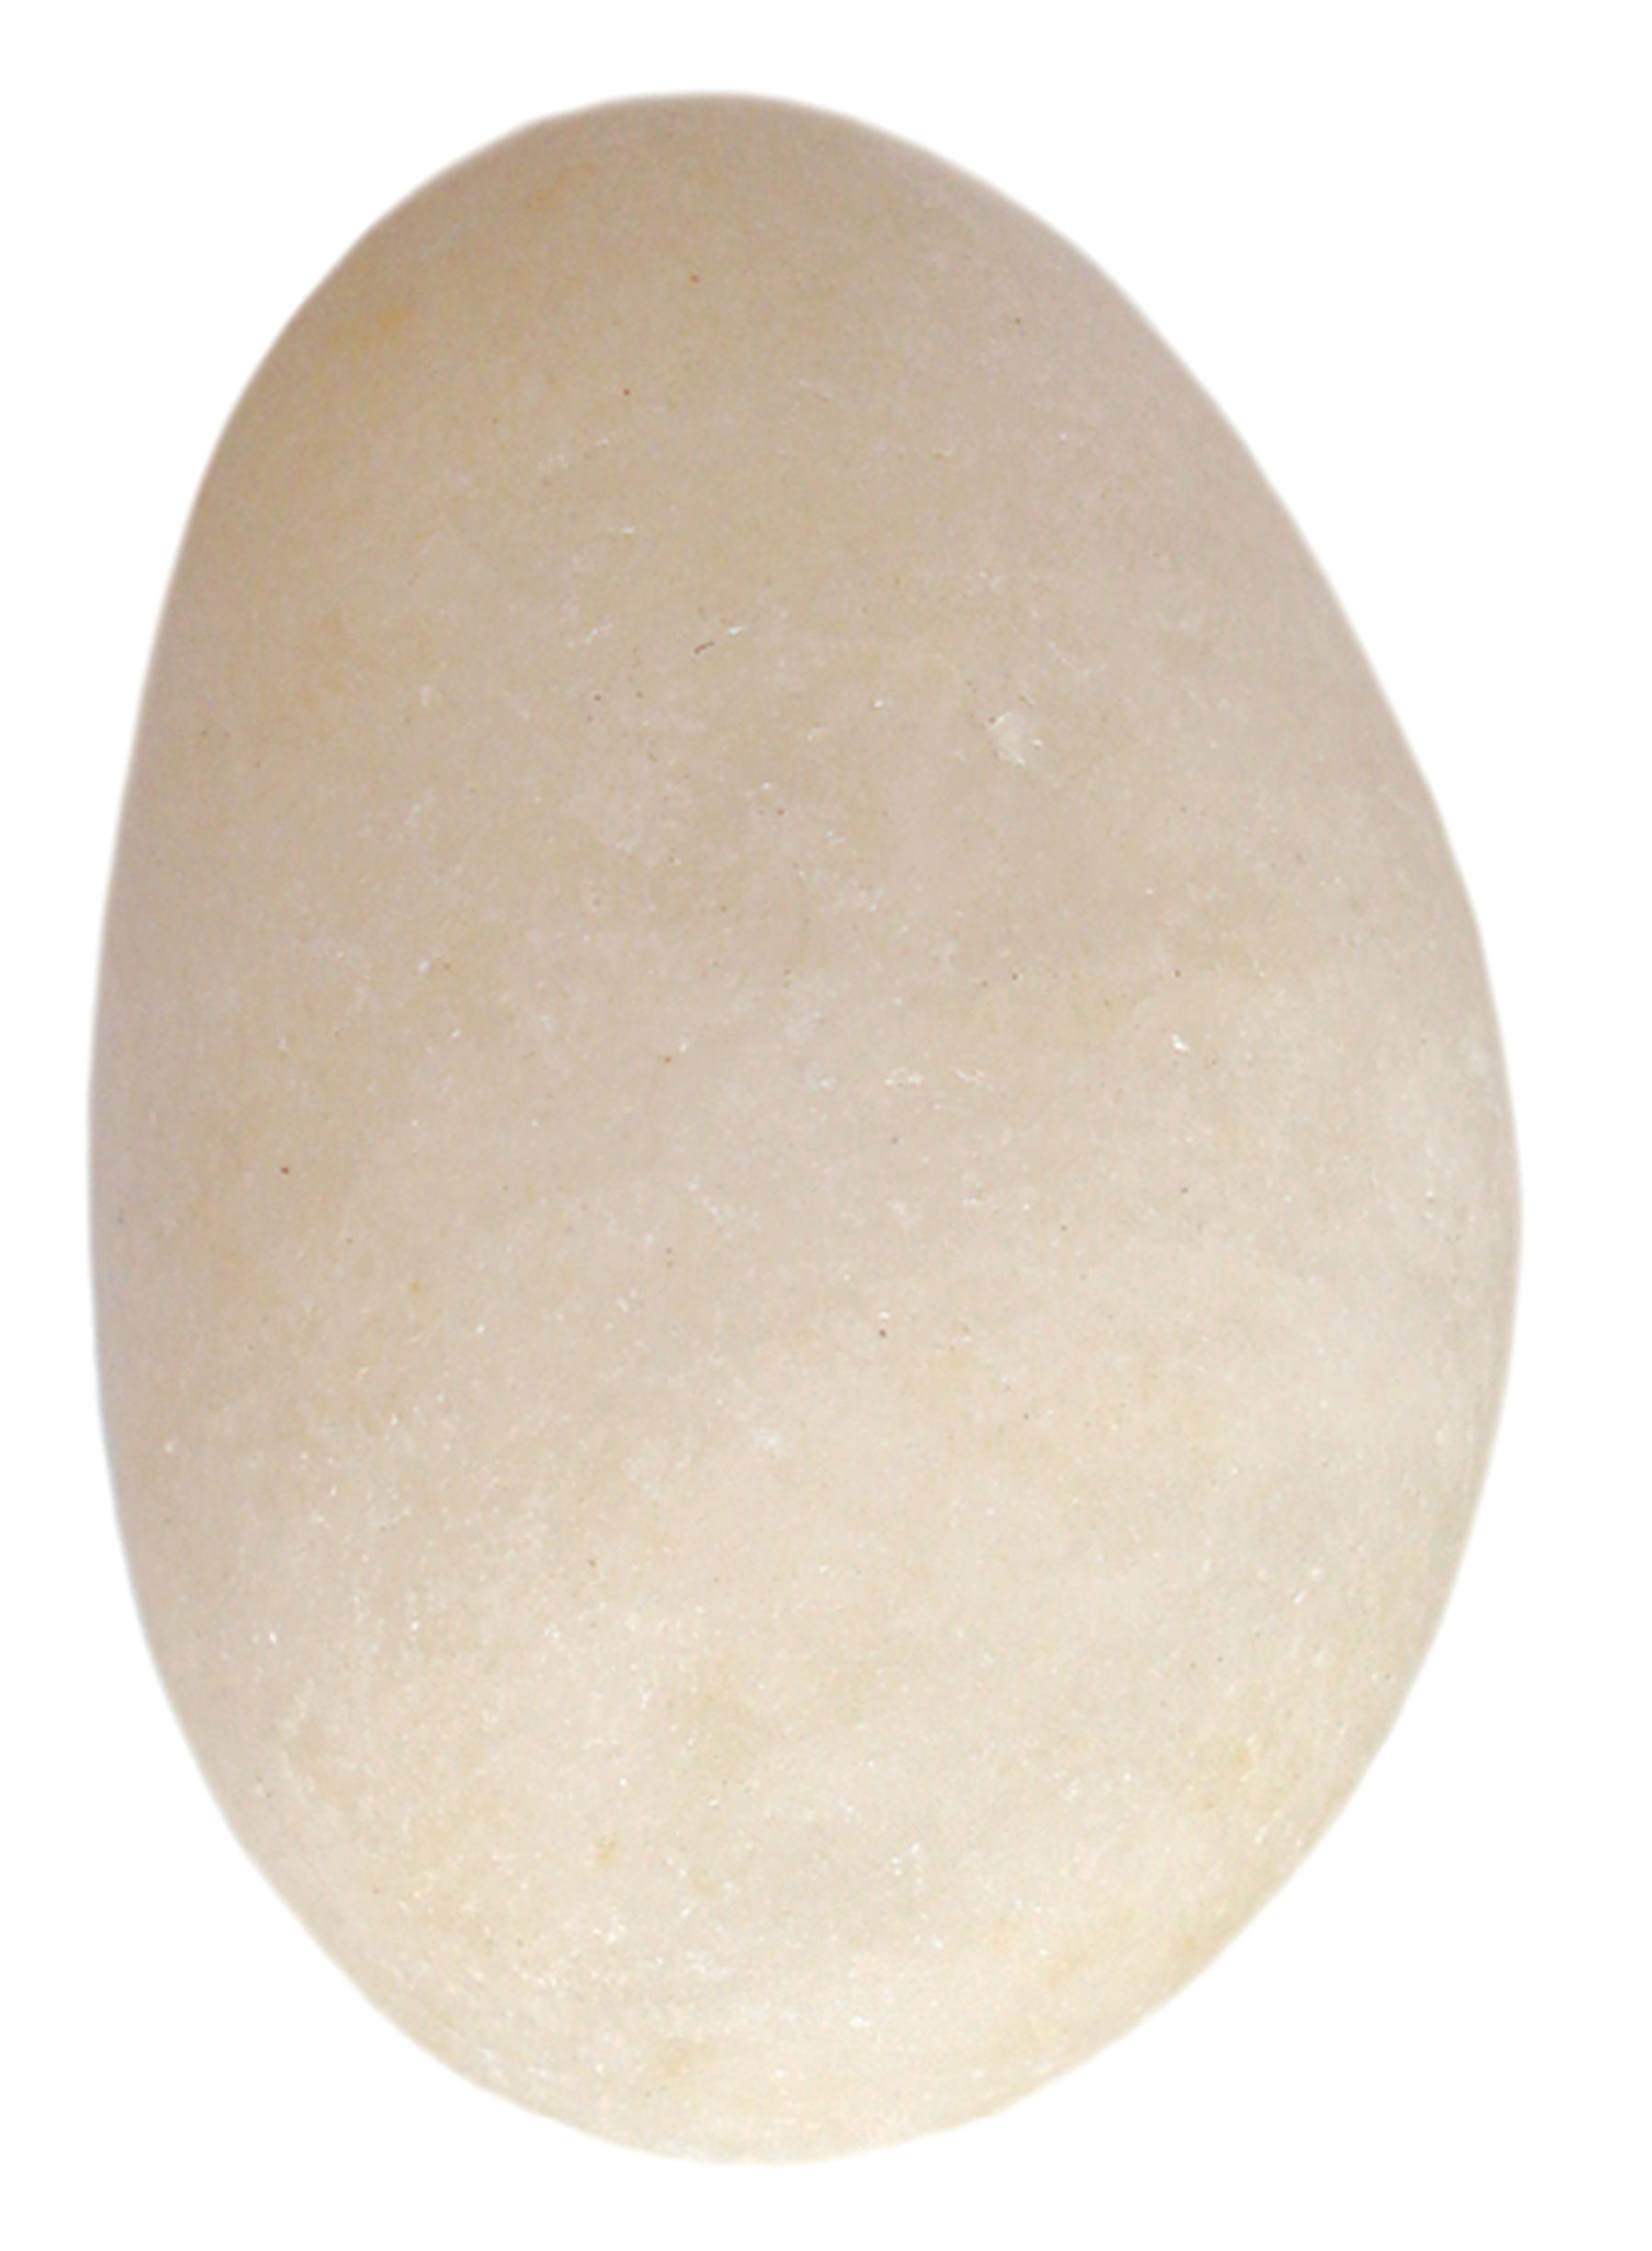 A photograph of a rock which resembles an egg. 